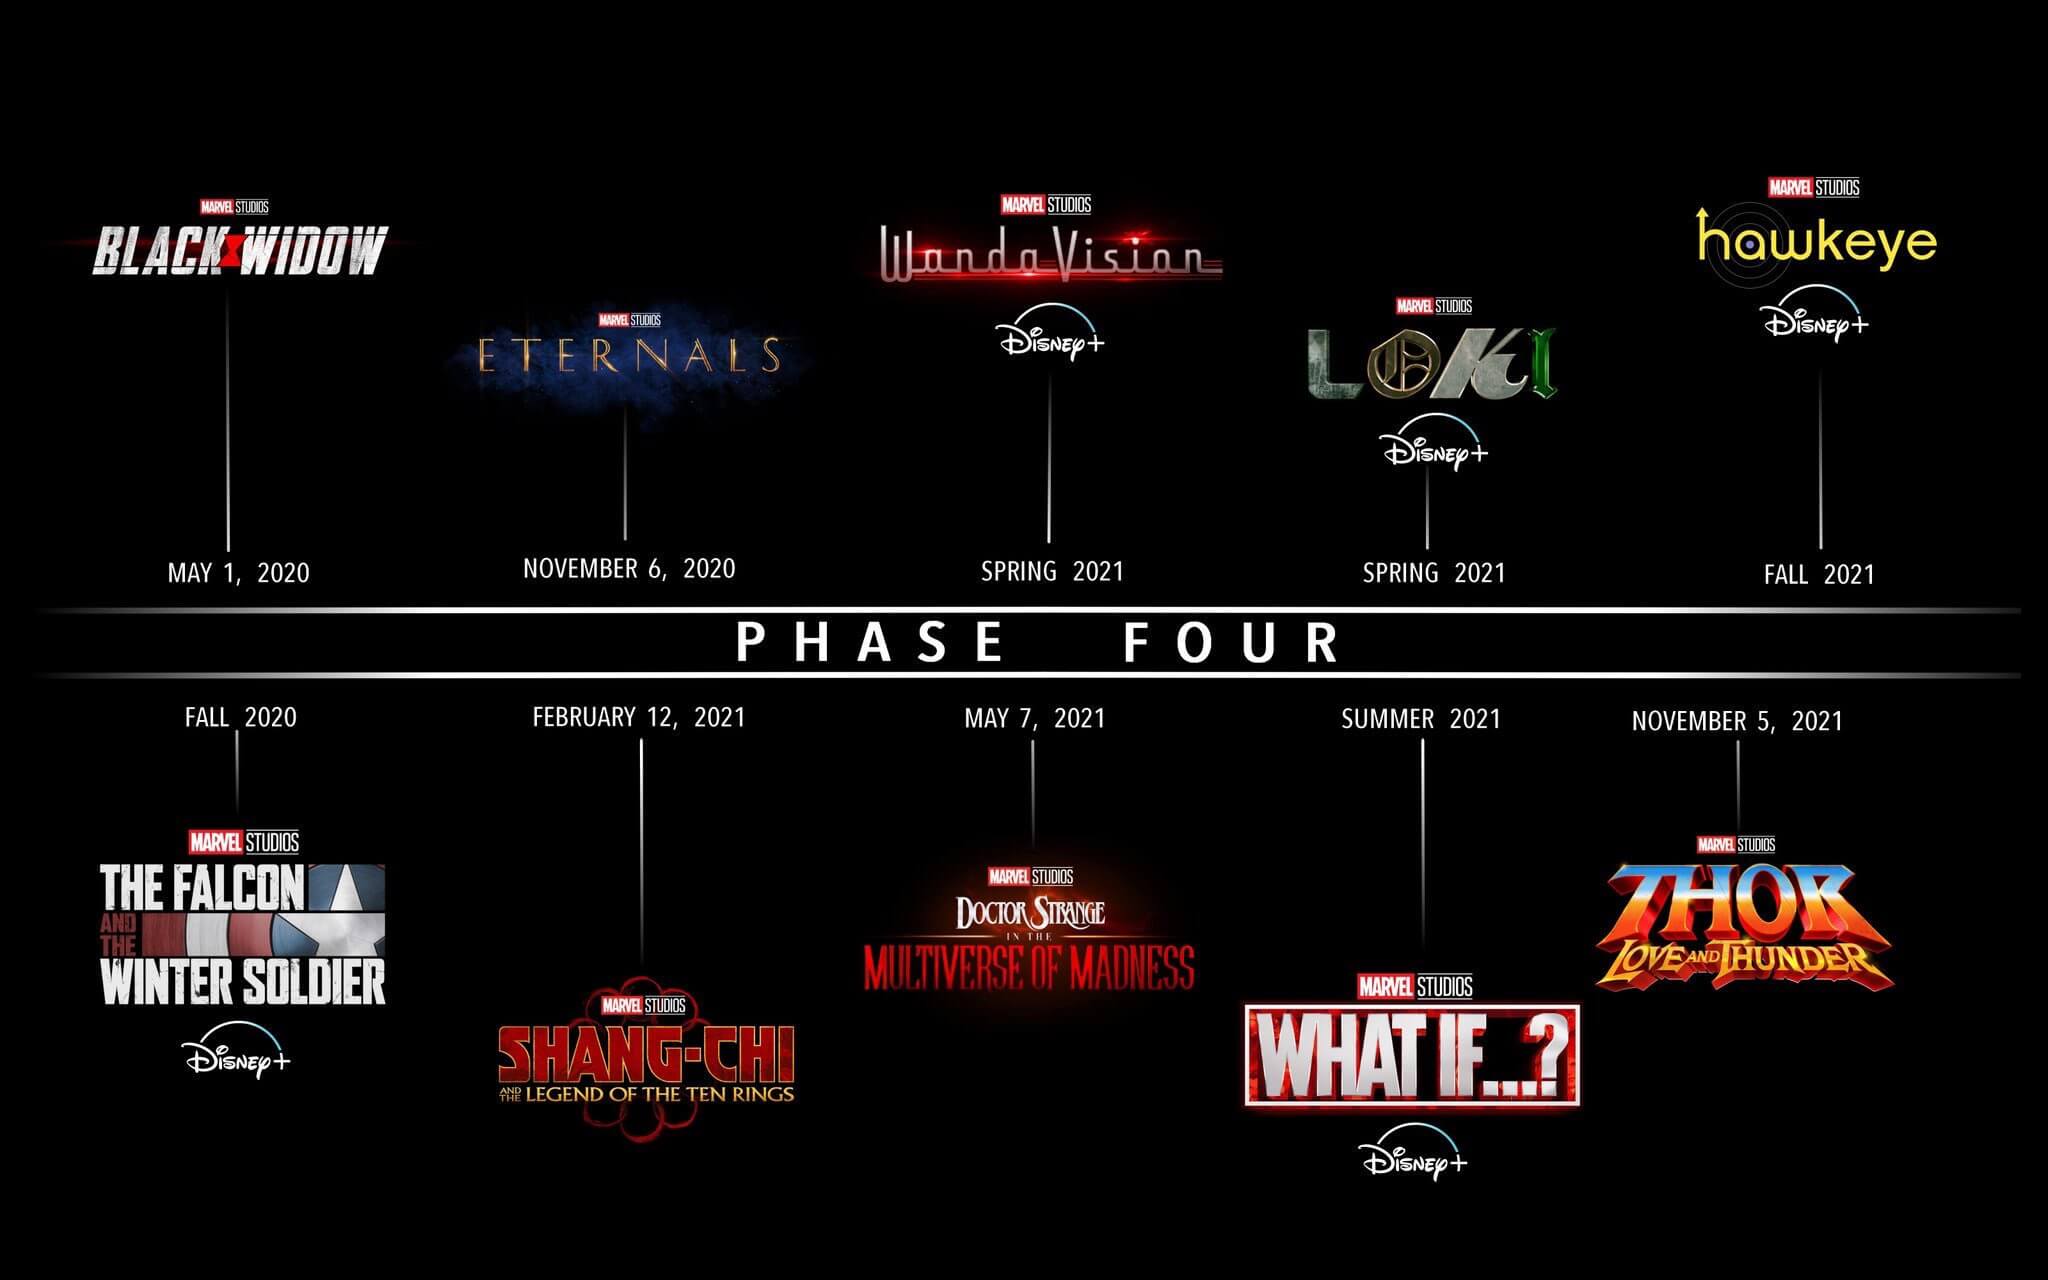 Marvel Studios Announces Phase 4 Line-Up, New Casting Announcements, New Films On The Way